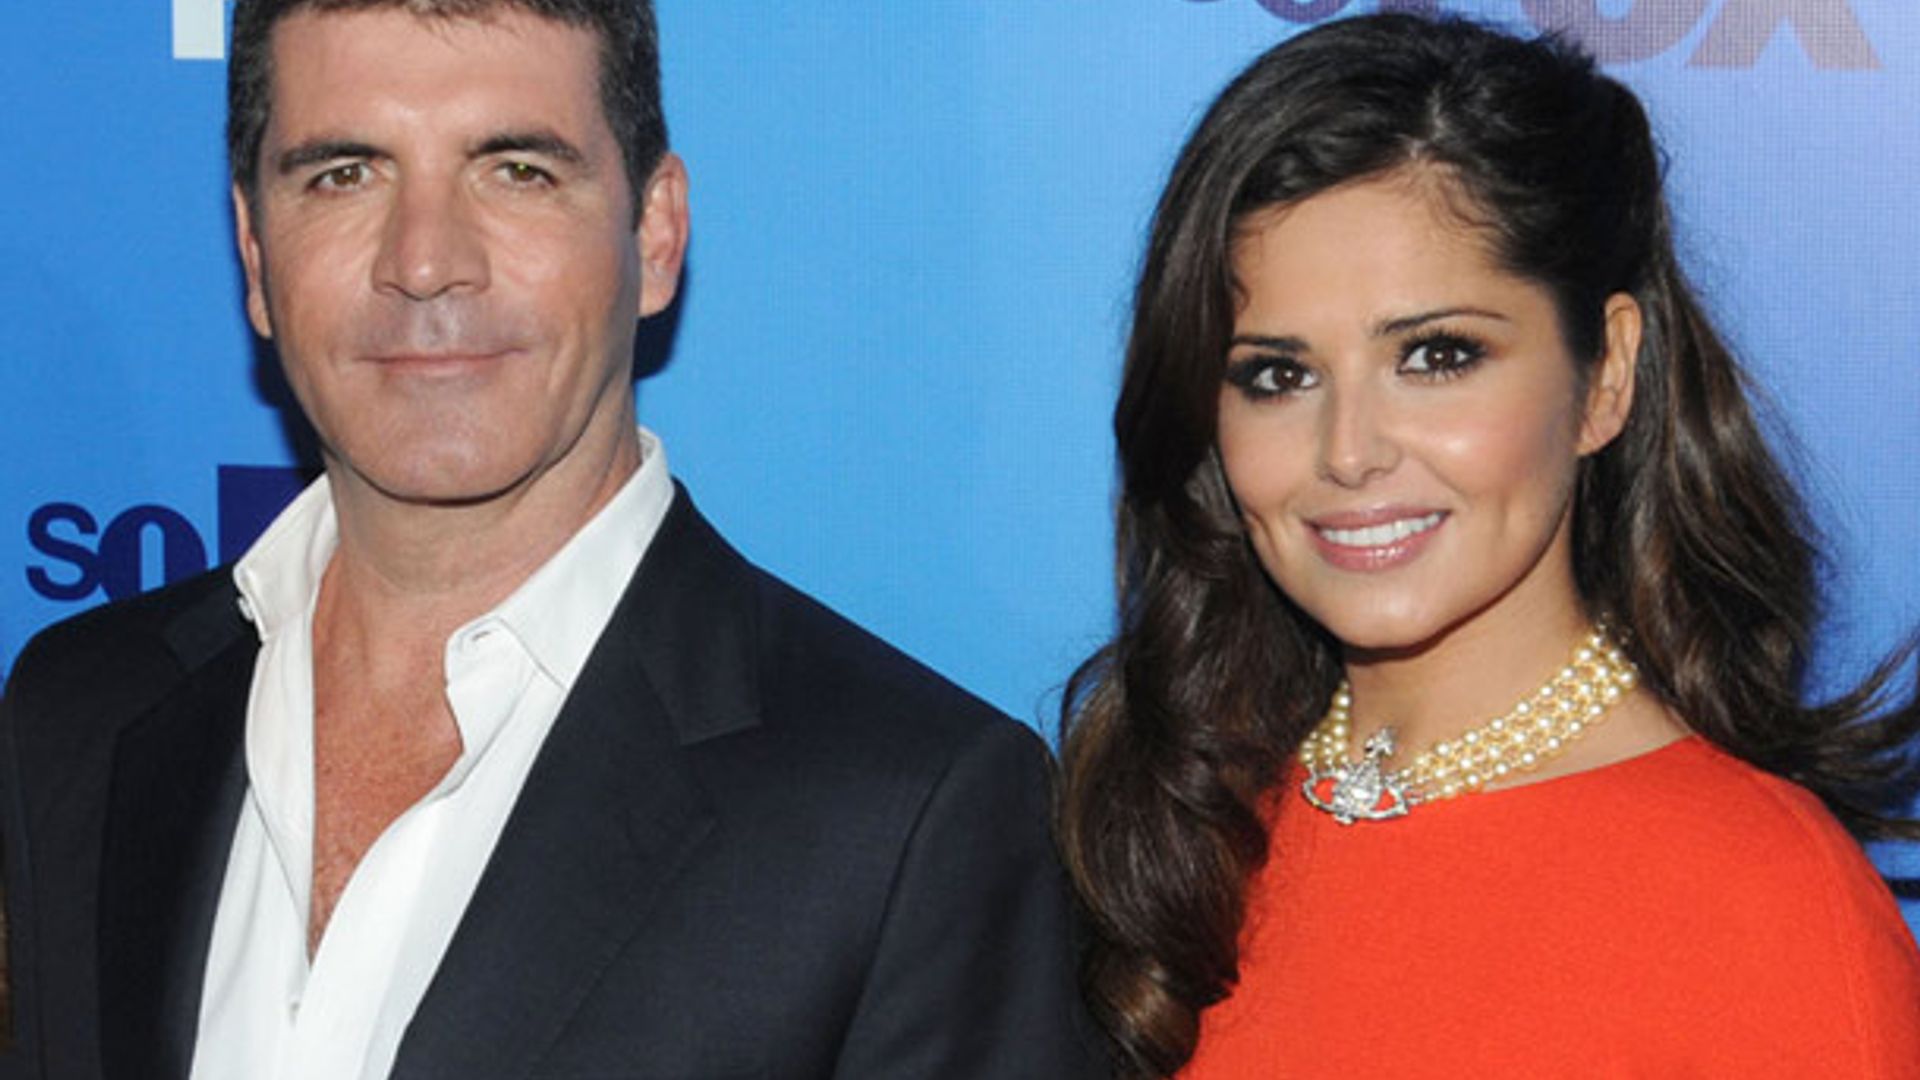 Simon Cowell on Cheryl Cole X Factor return: 'We have to find a way'